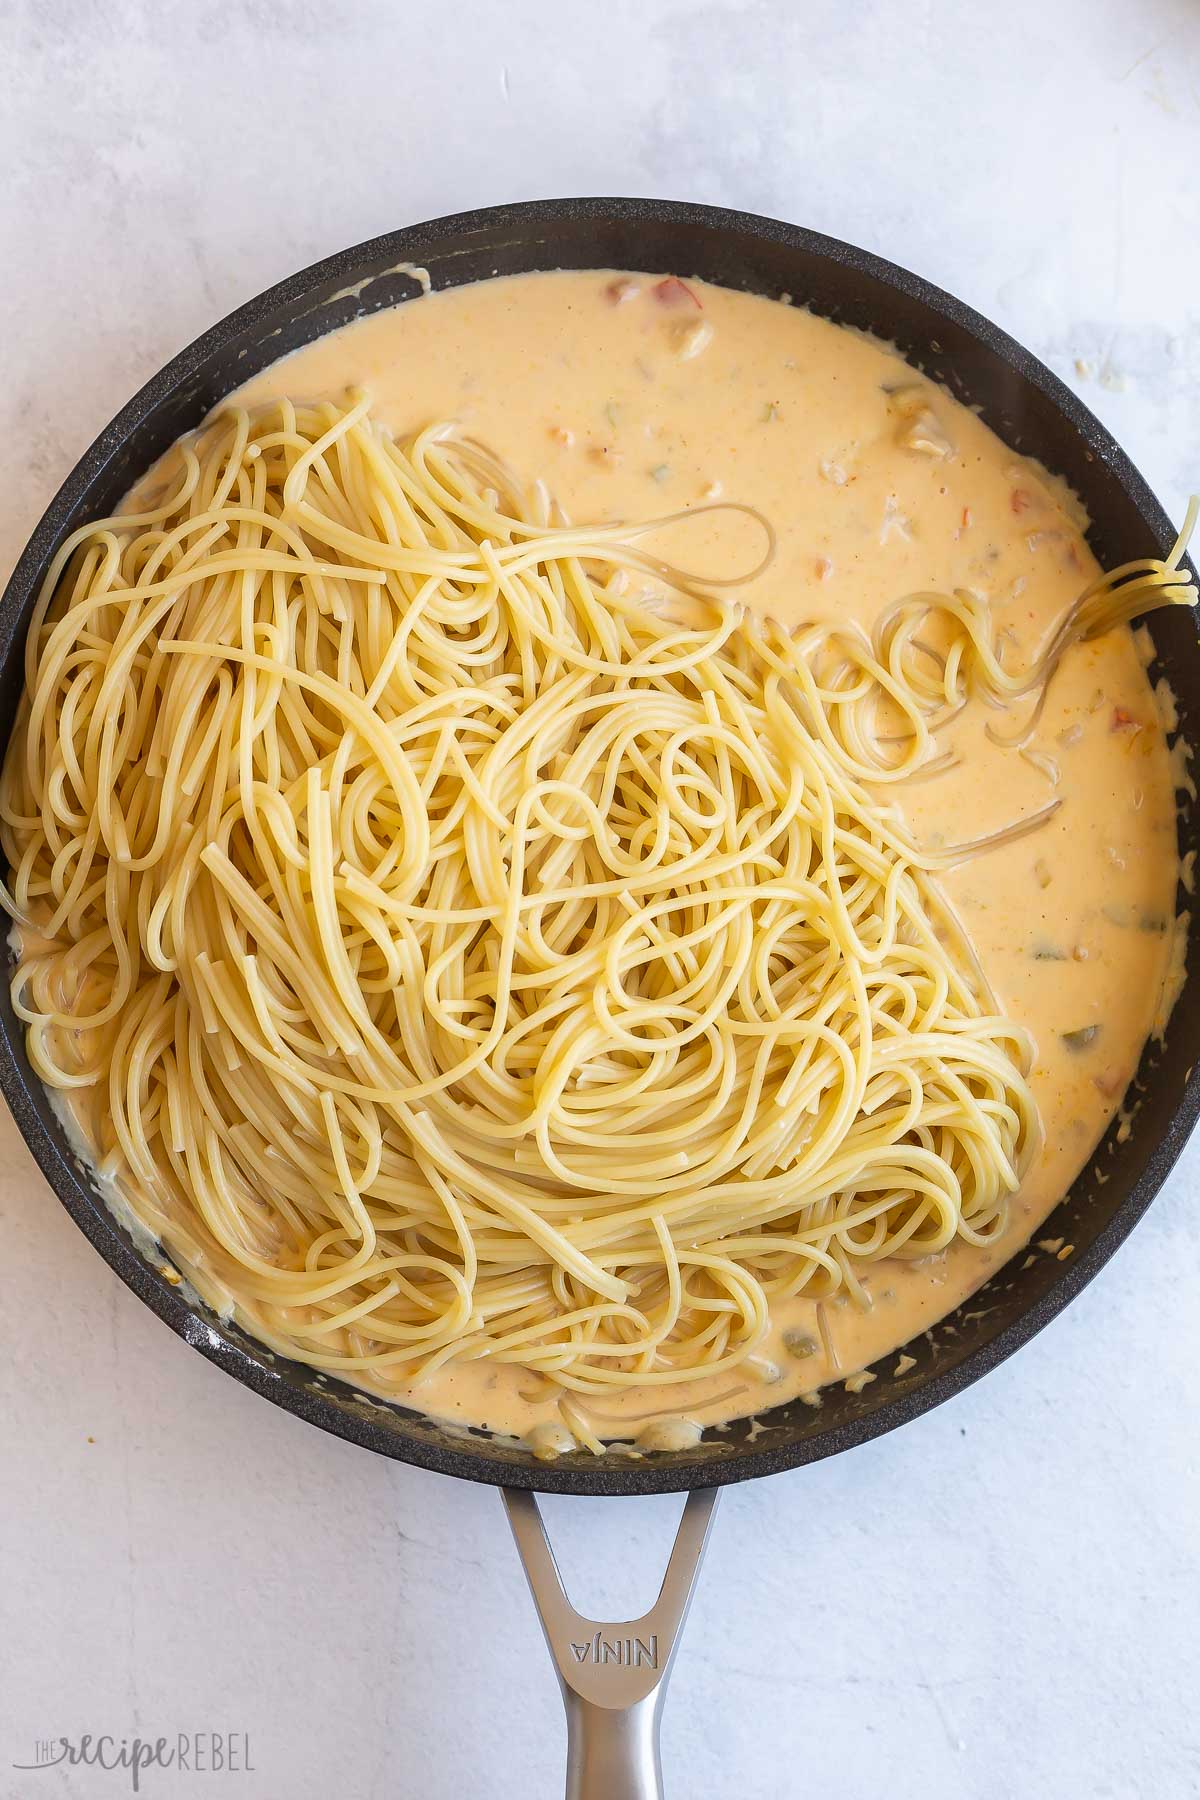 cooked spaghetti noodles added to creamy chicken sauce.